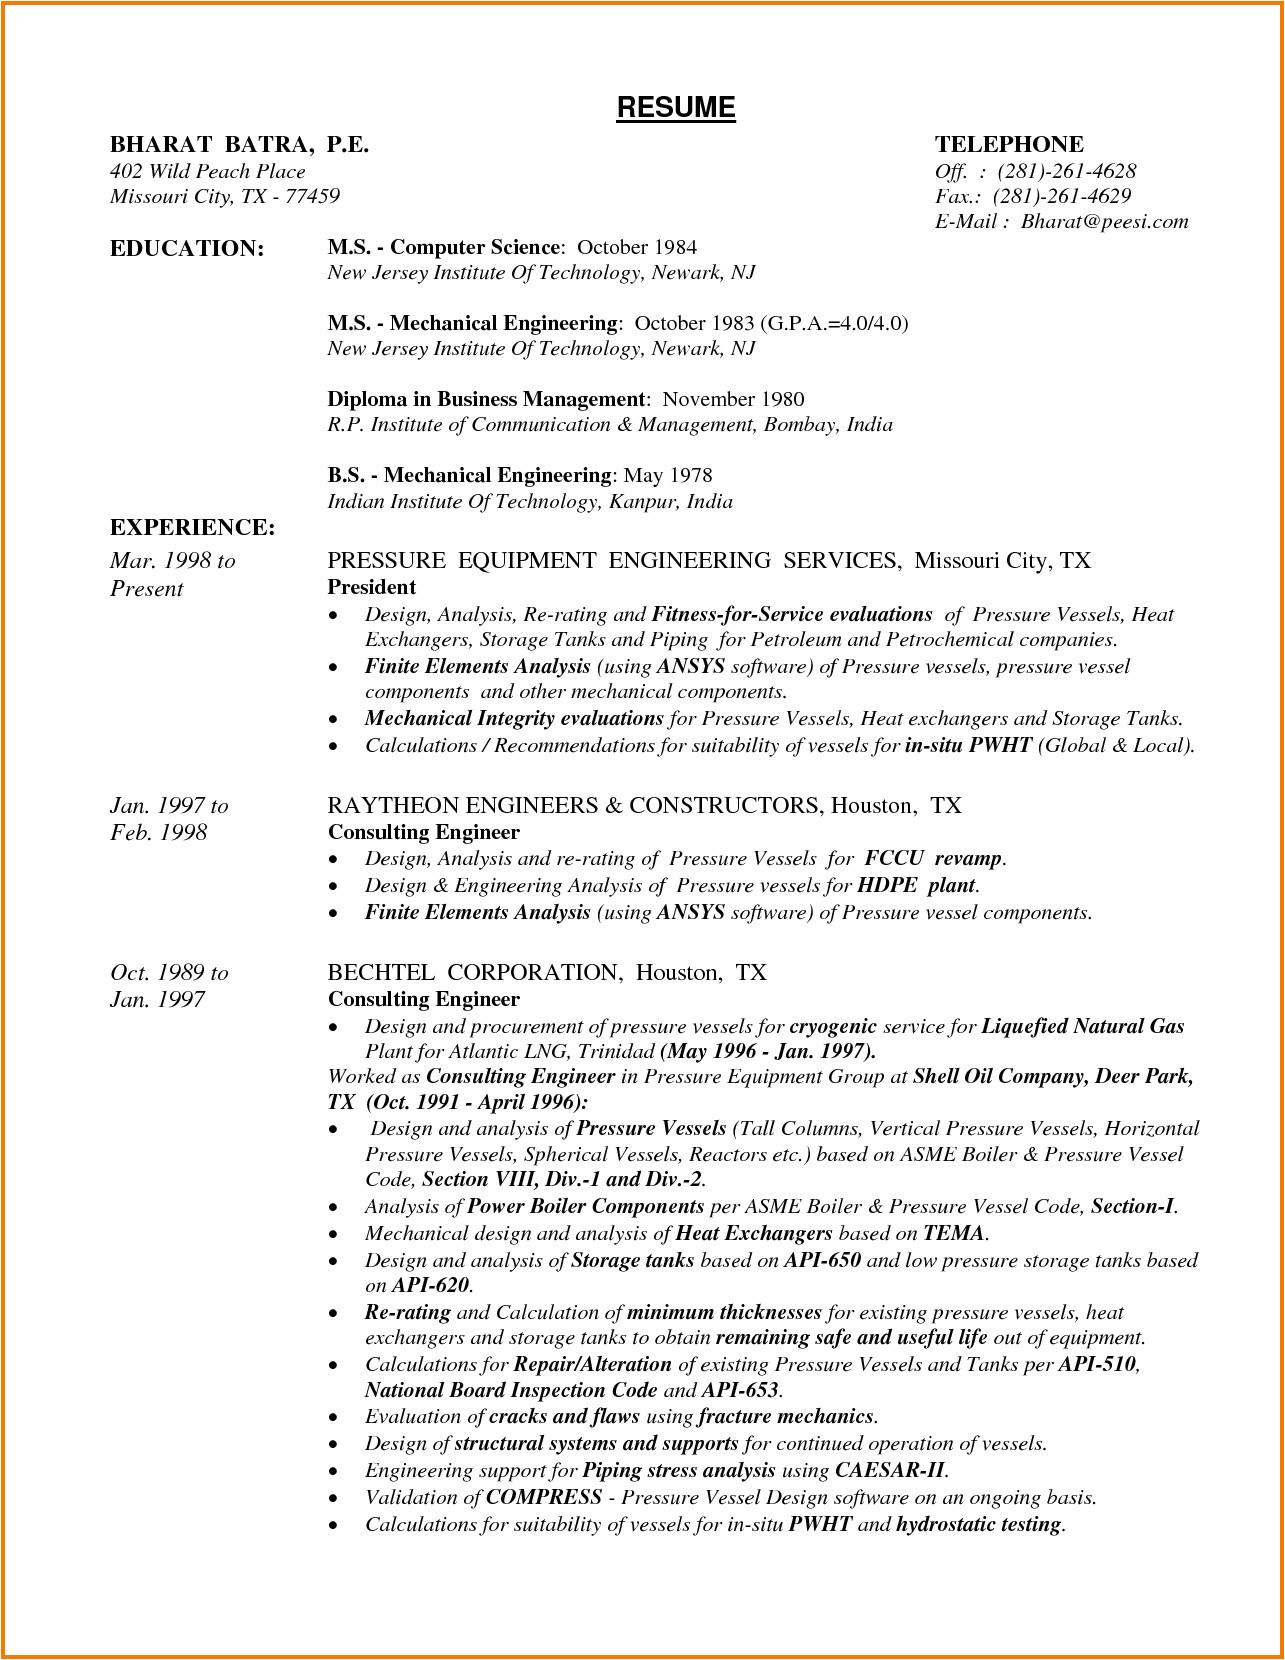 Sample Resume for Experienced Mechanical Engineer Resume Samples for Experienced Mechanical Engineers